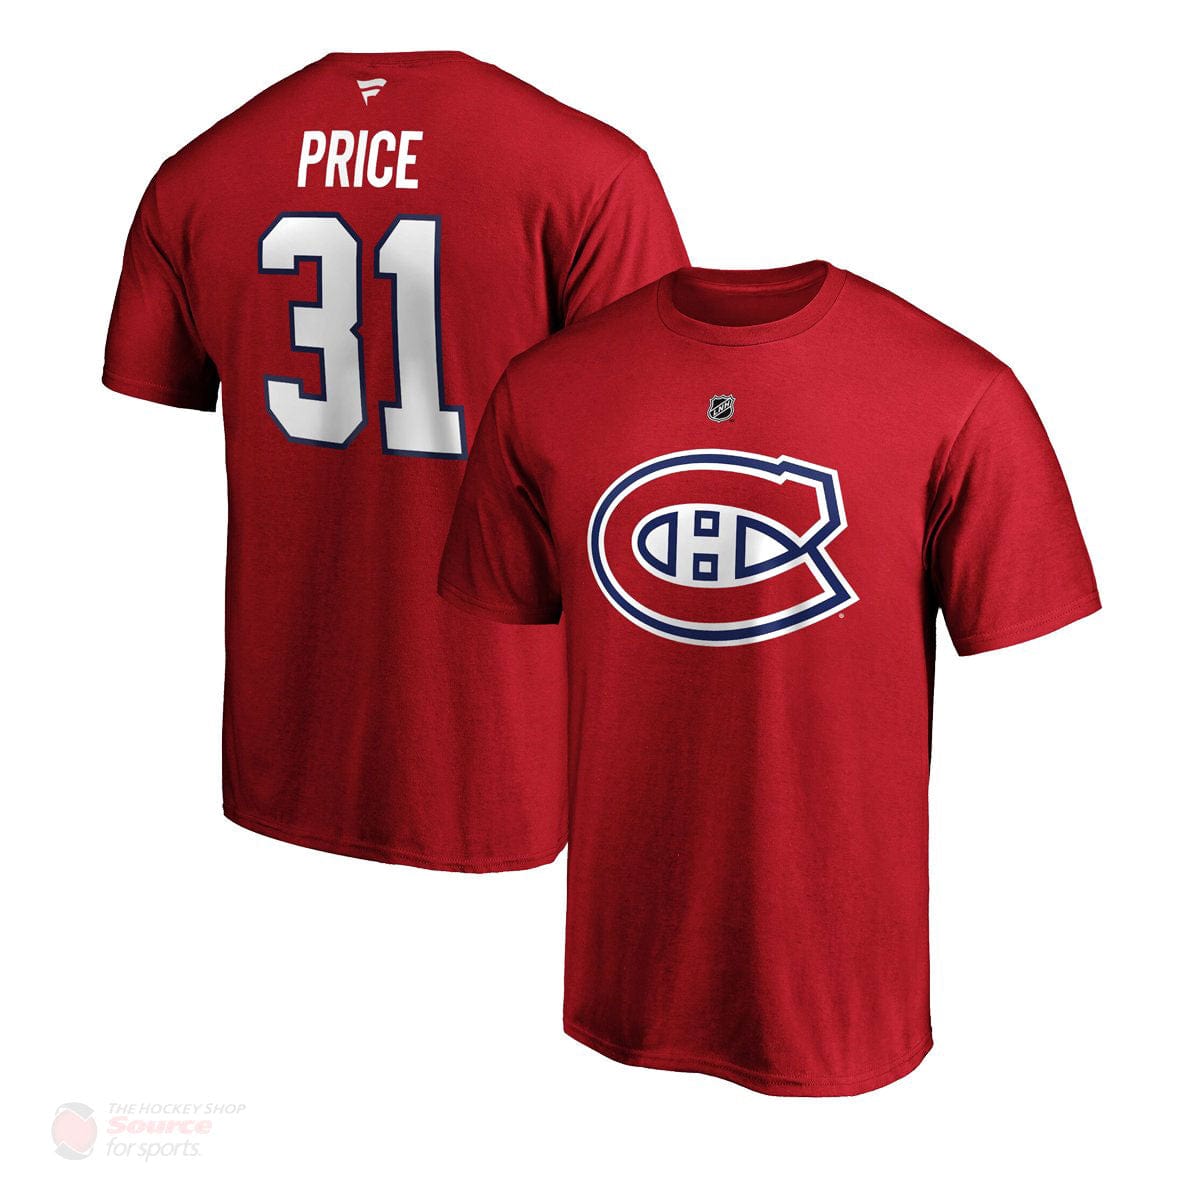 Montreal Canadiens Fanatics Authentic Name & Number Mens Shirt - Carey Price